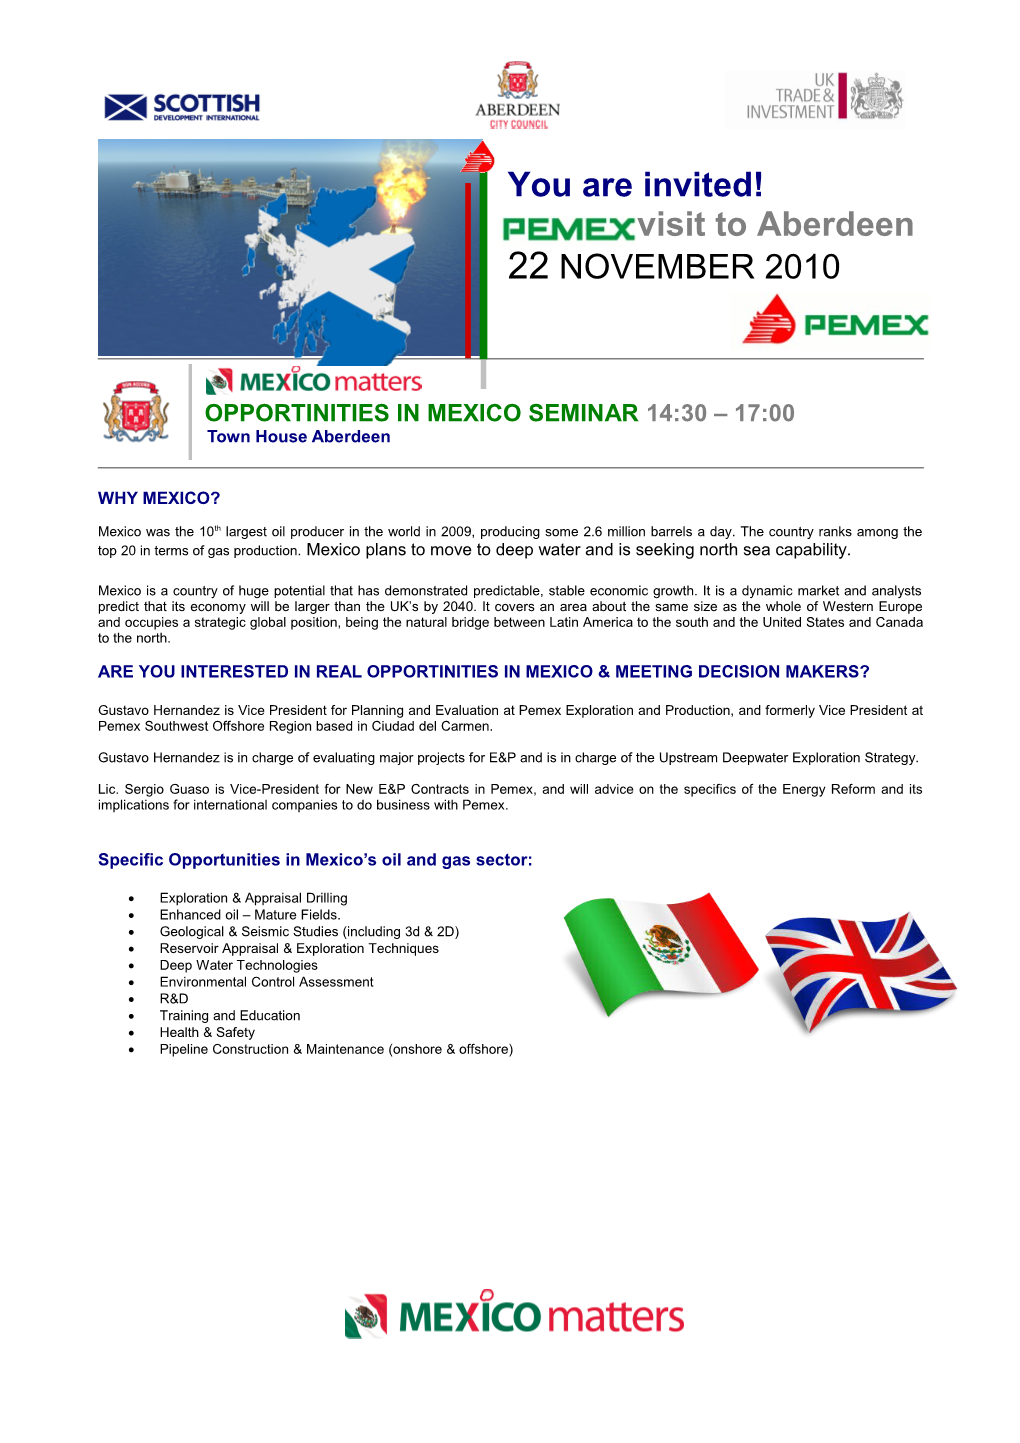 Opportinities in Mexico Seminar14:30 17:00